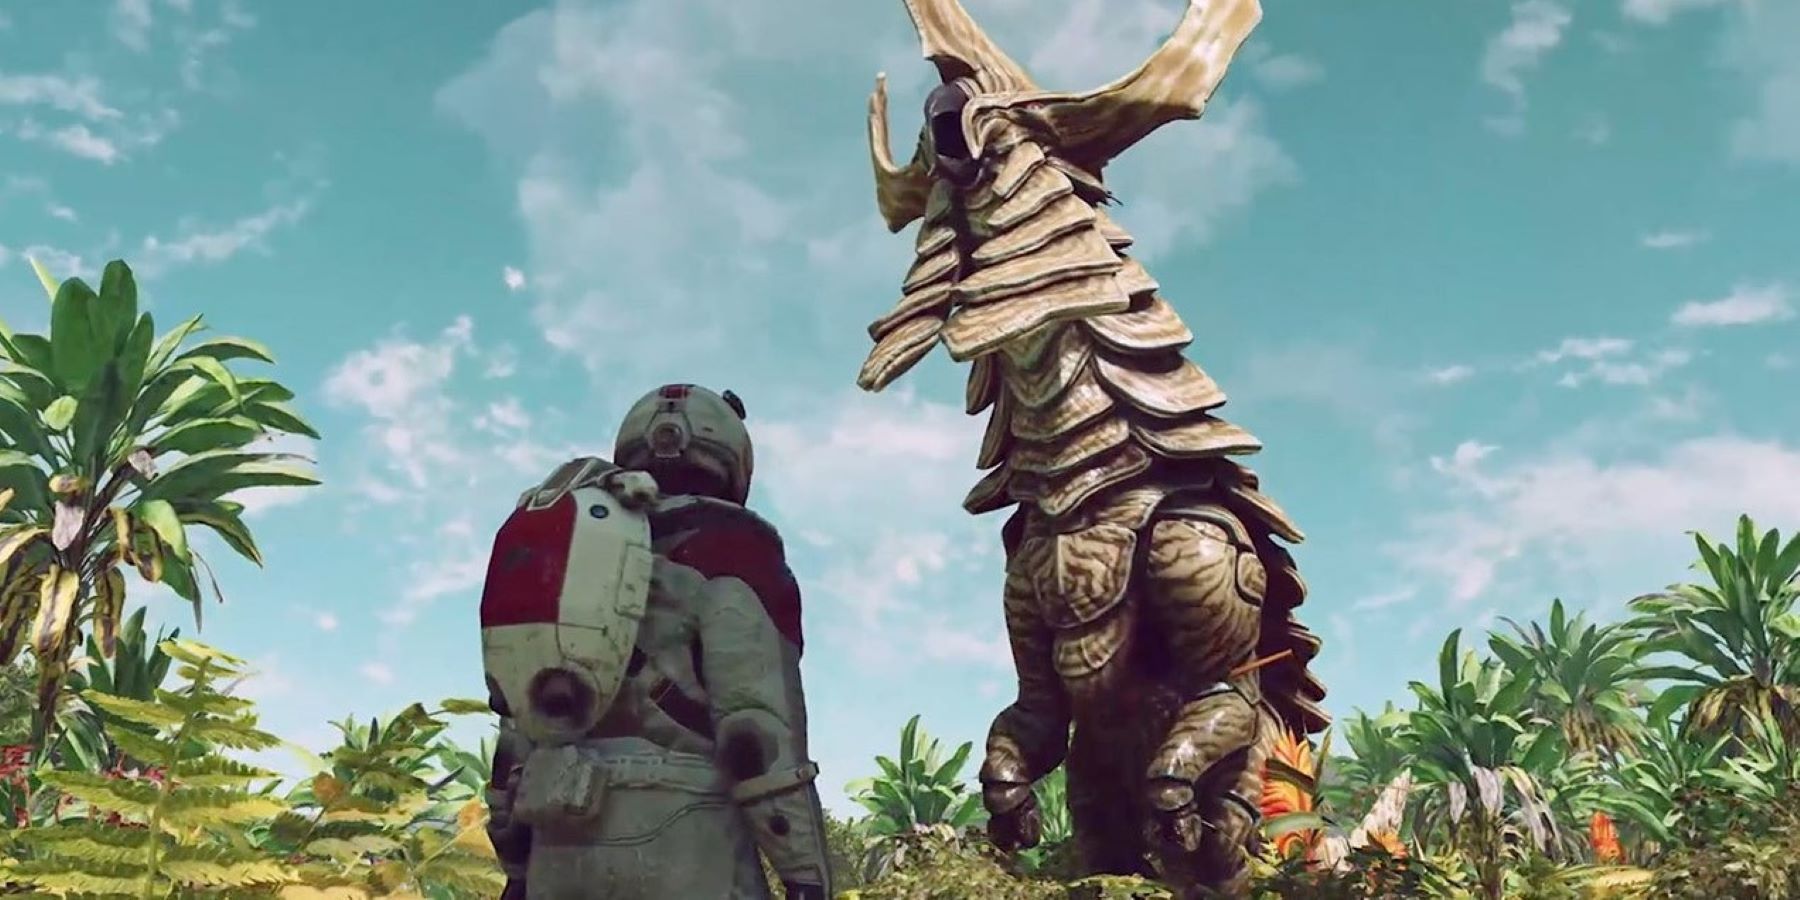 A large horned creature on a lush jungle planet looming over the Starfield protagonist